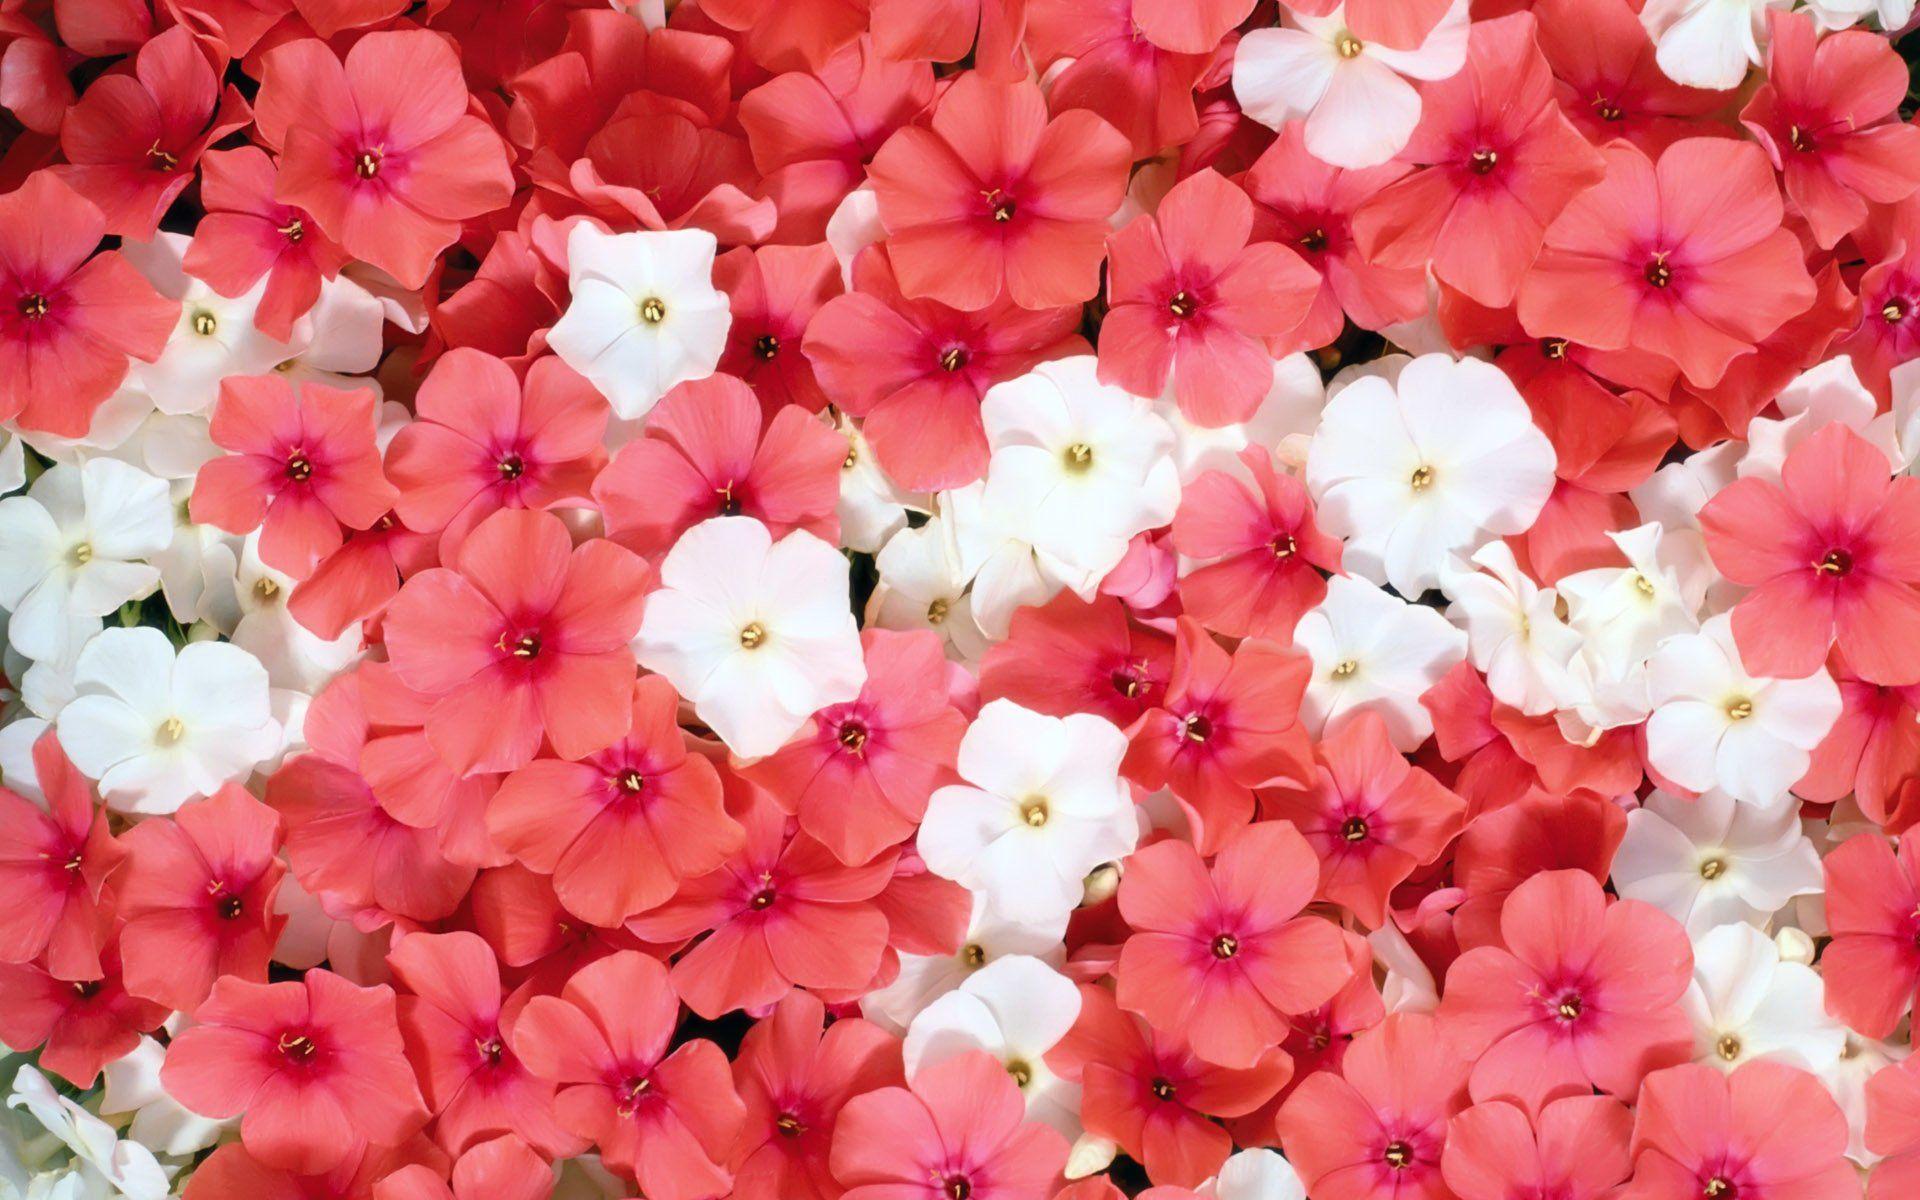 Pink and White Flower Wallpapers - Top Free Pink and White Flower